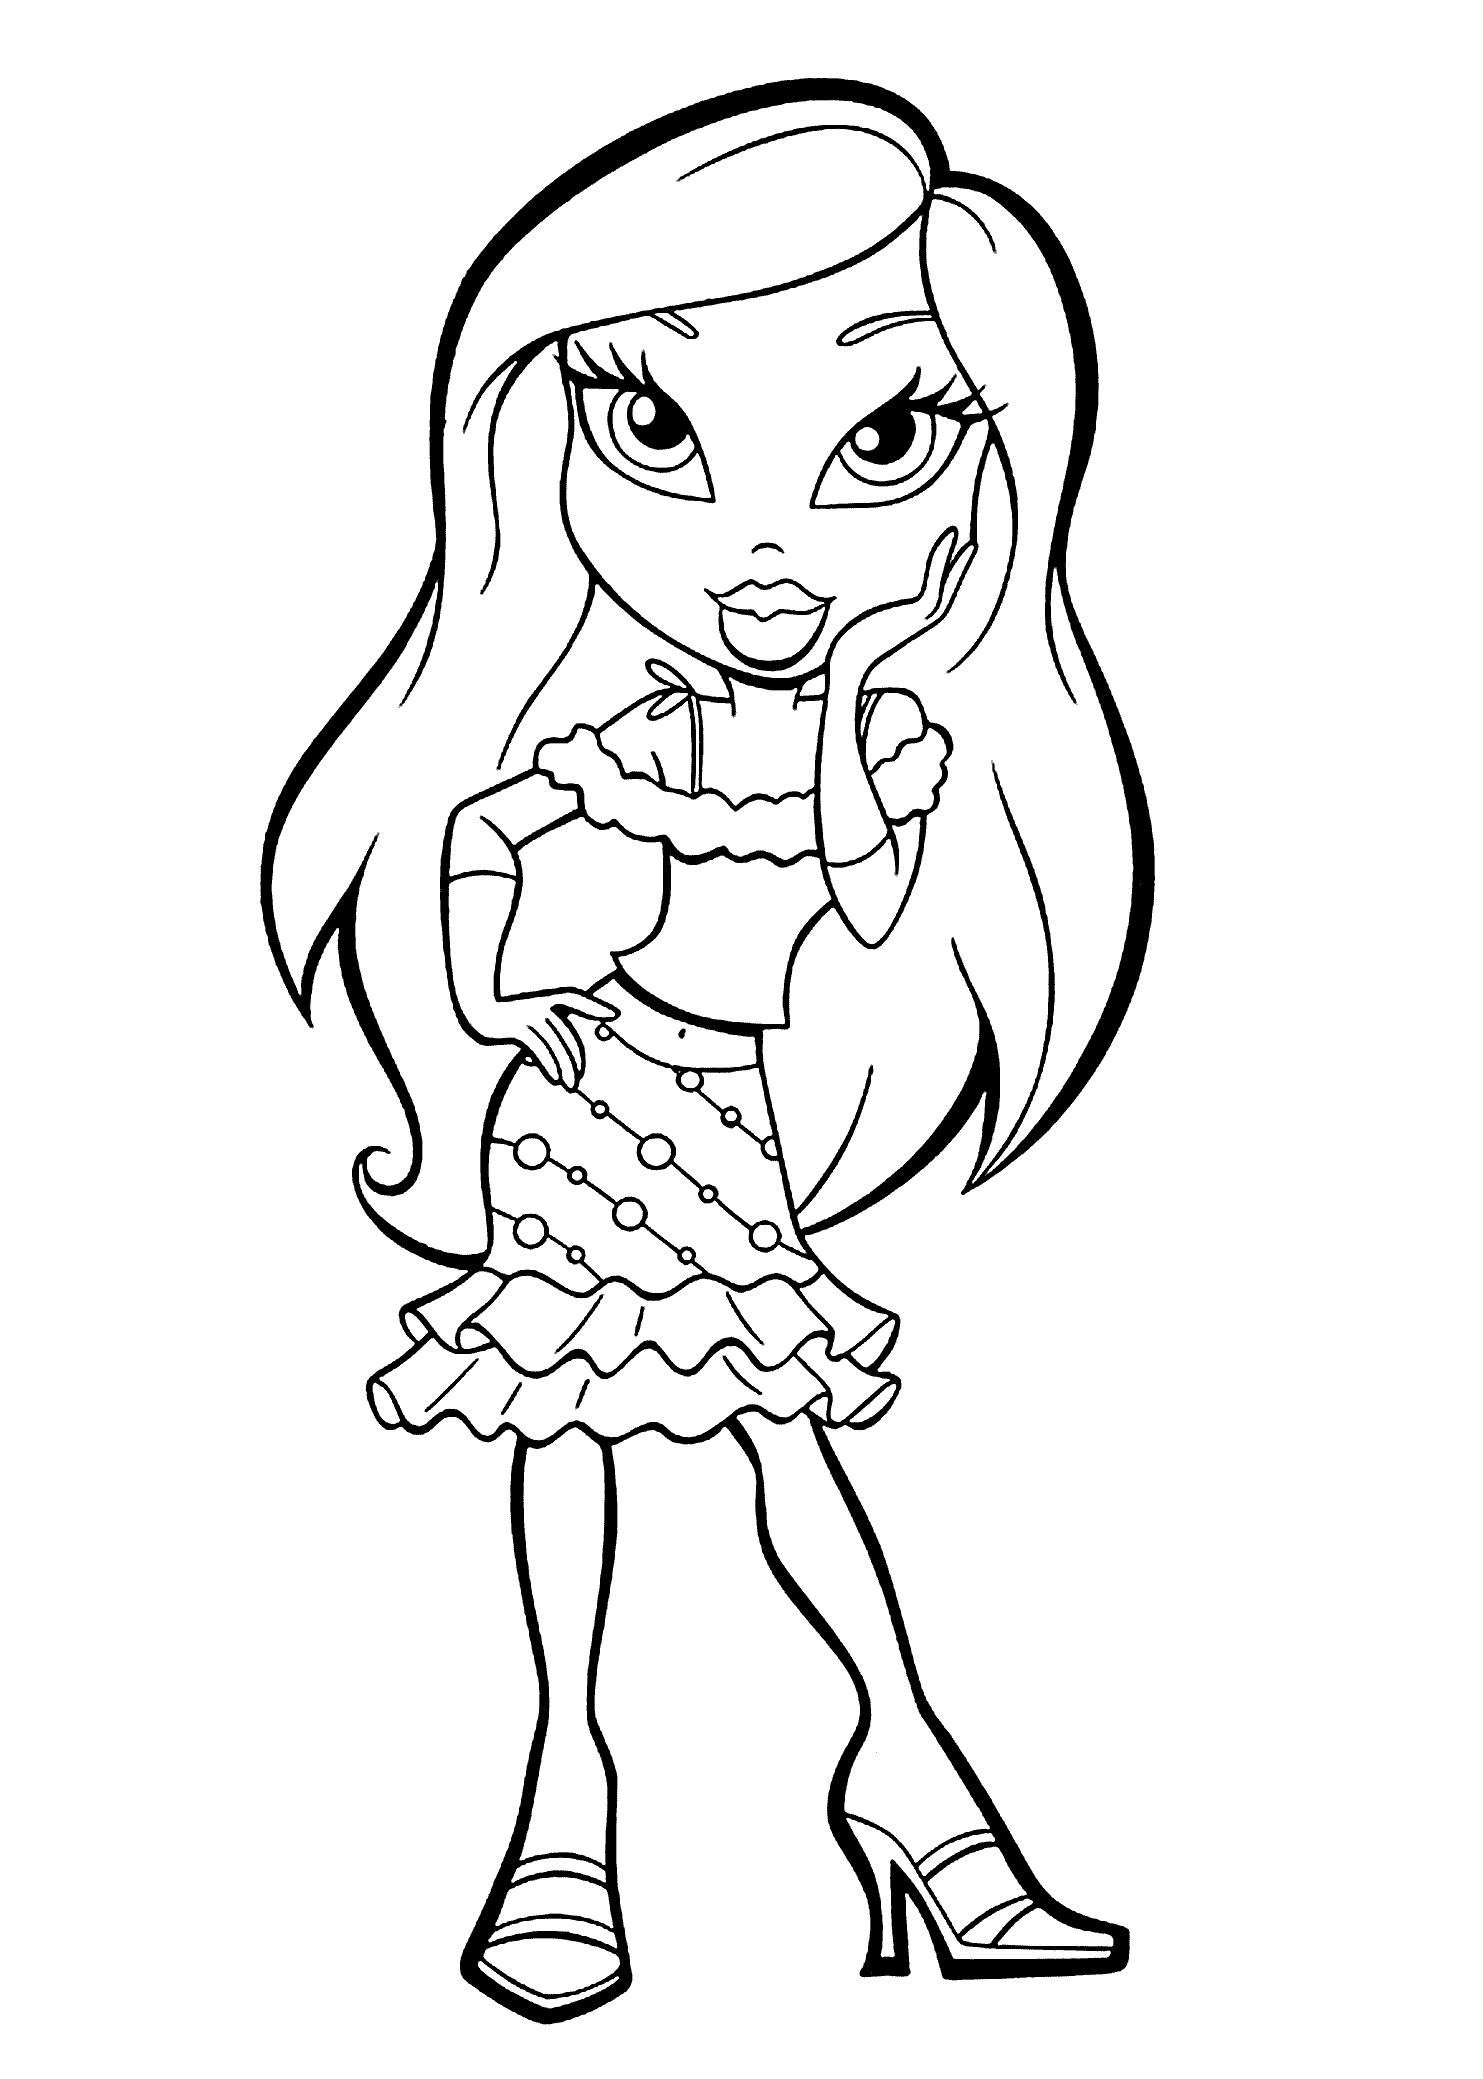 Bratz dolls coloring pages for kids printable free cartoon coloring pages coloring pages baby coloring pages